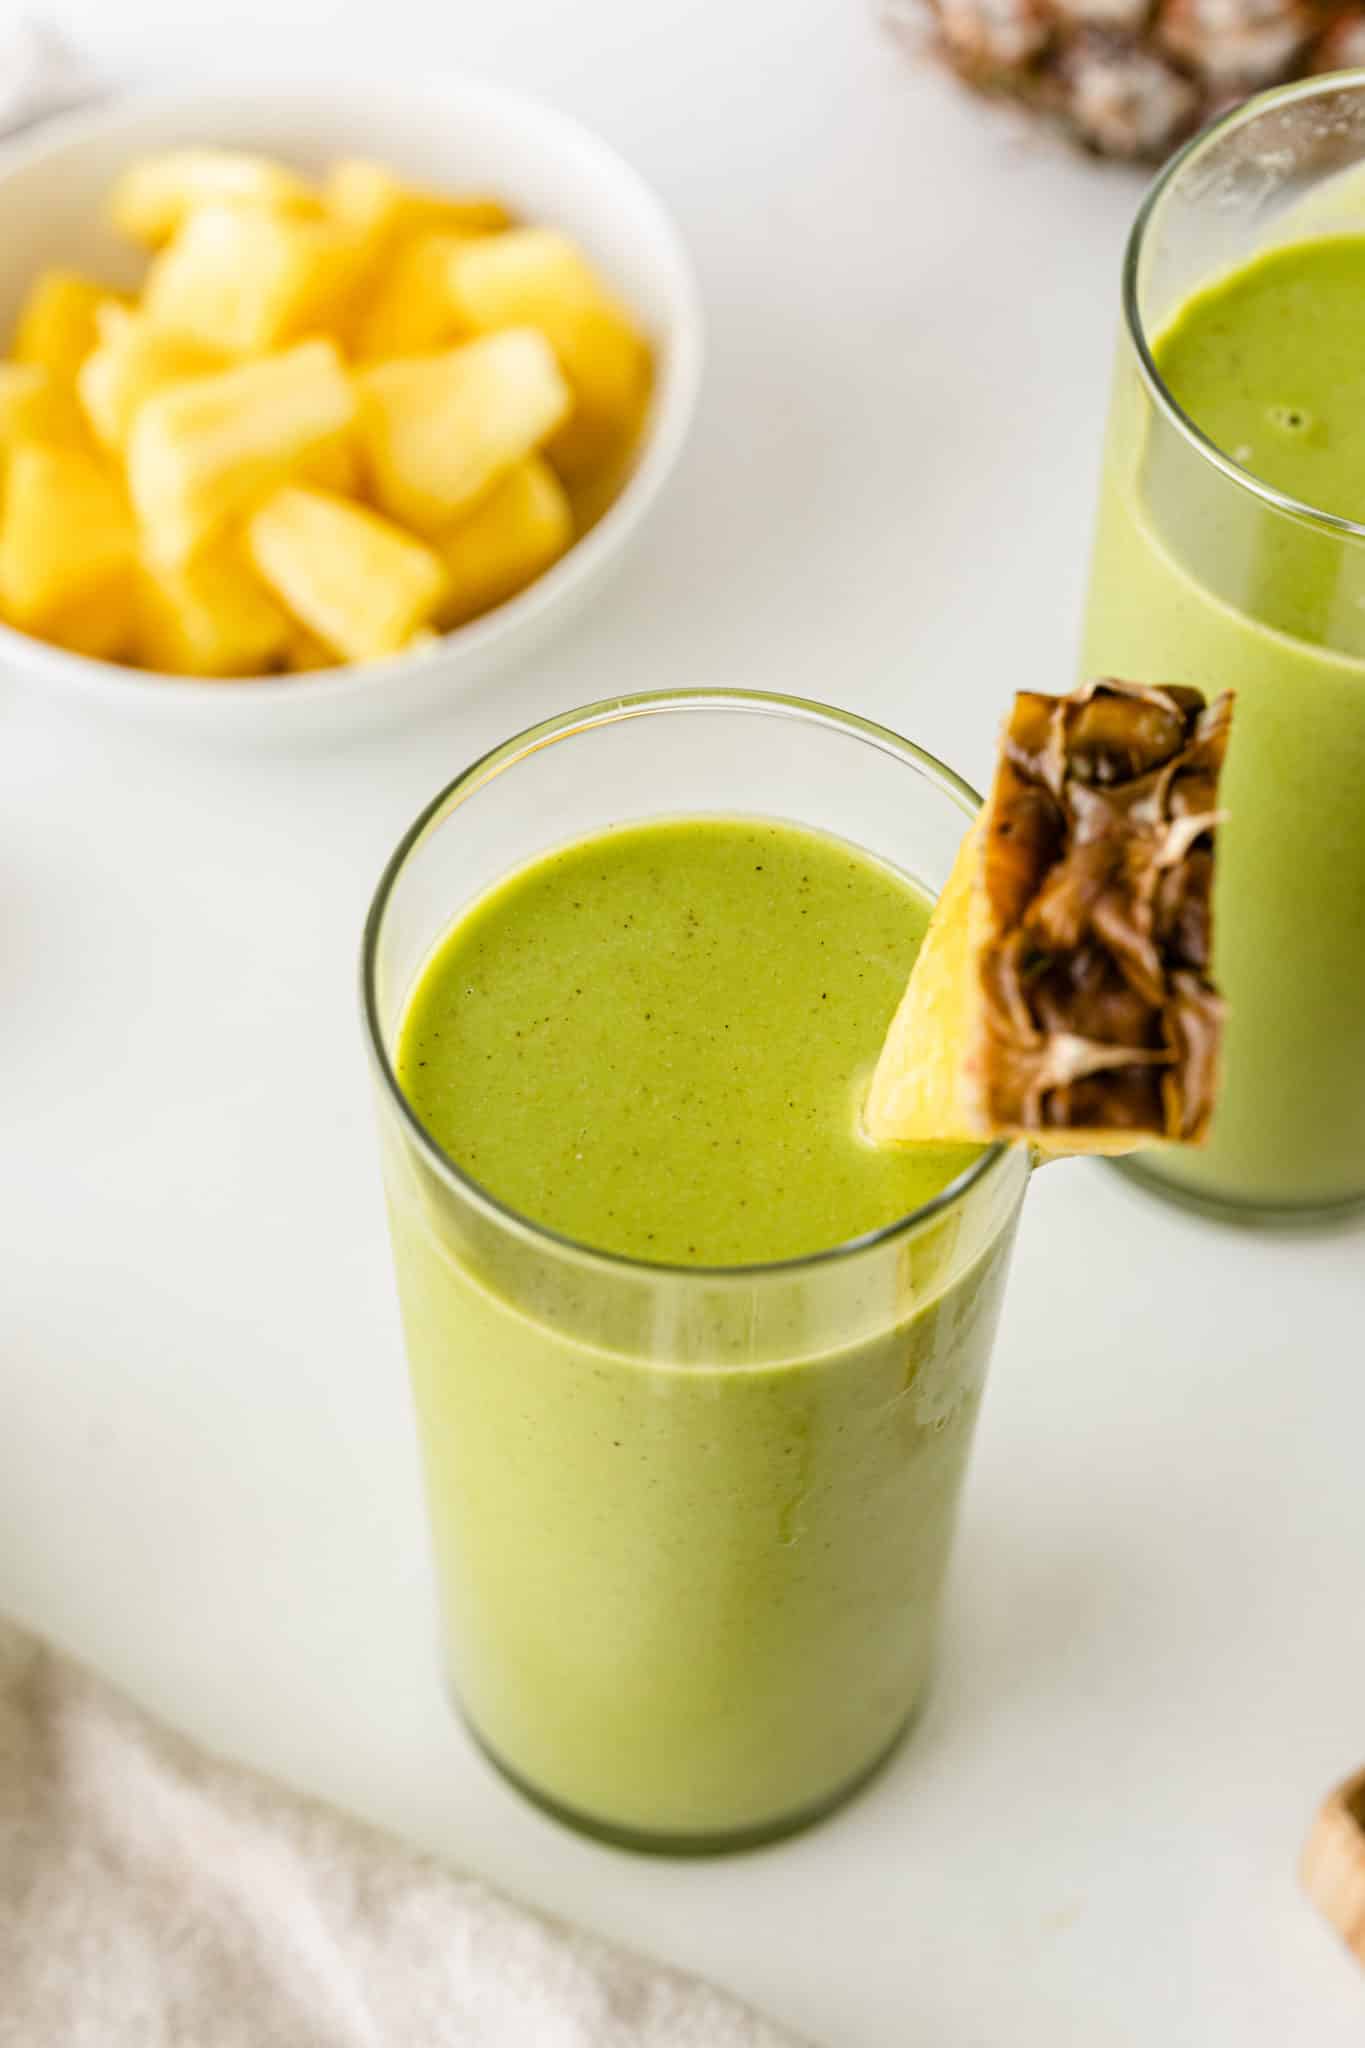 green smoothie served in a glass with a wedge of fresh pineapple